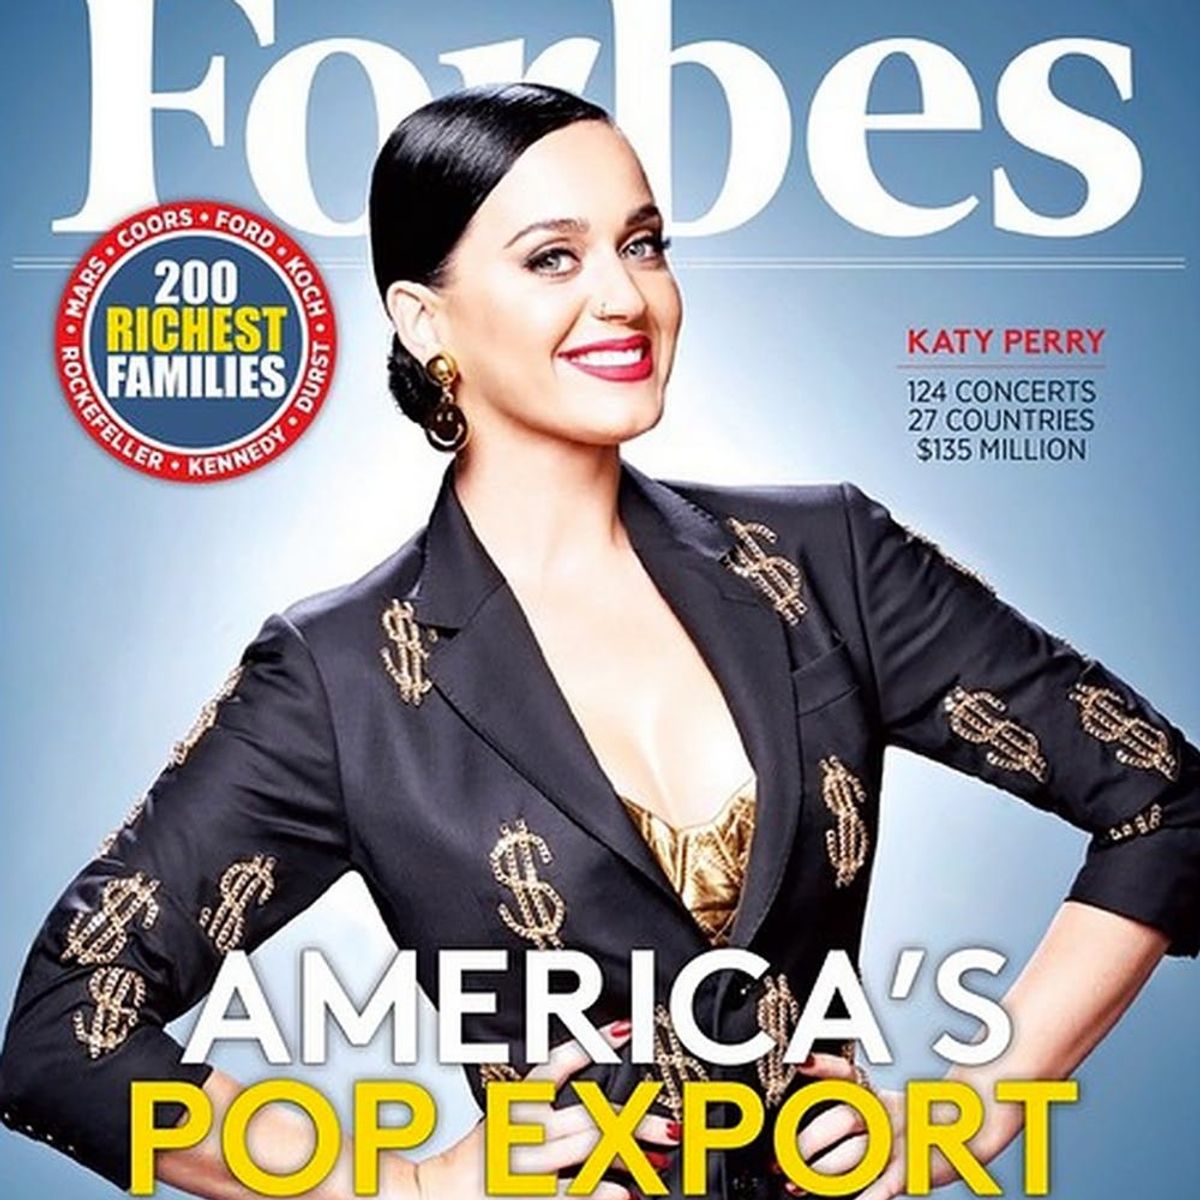 Katy Perry’s Best Career Advice + 3 More #Girlboss Tips from the Richest Female Celebs